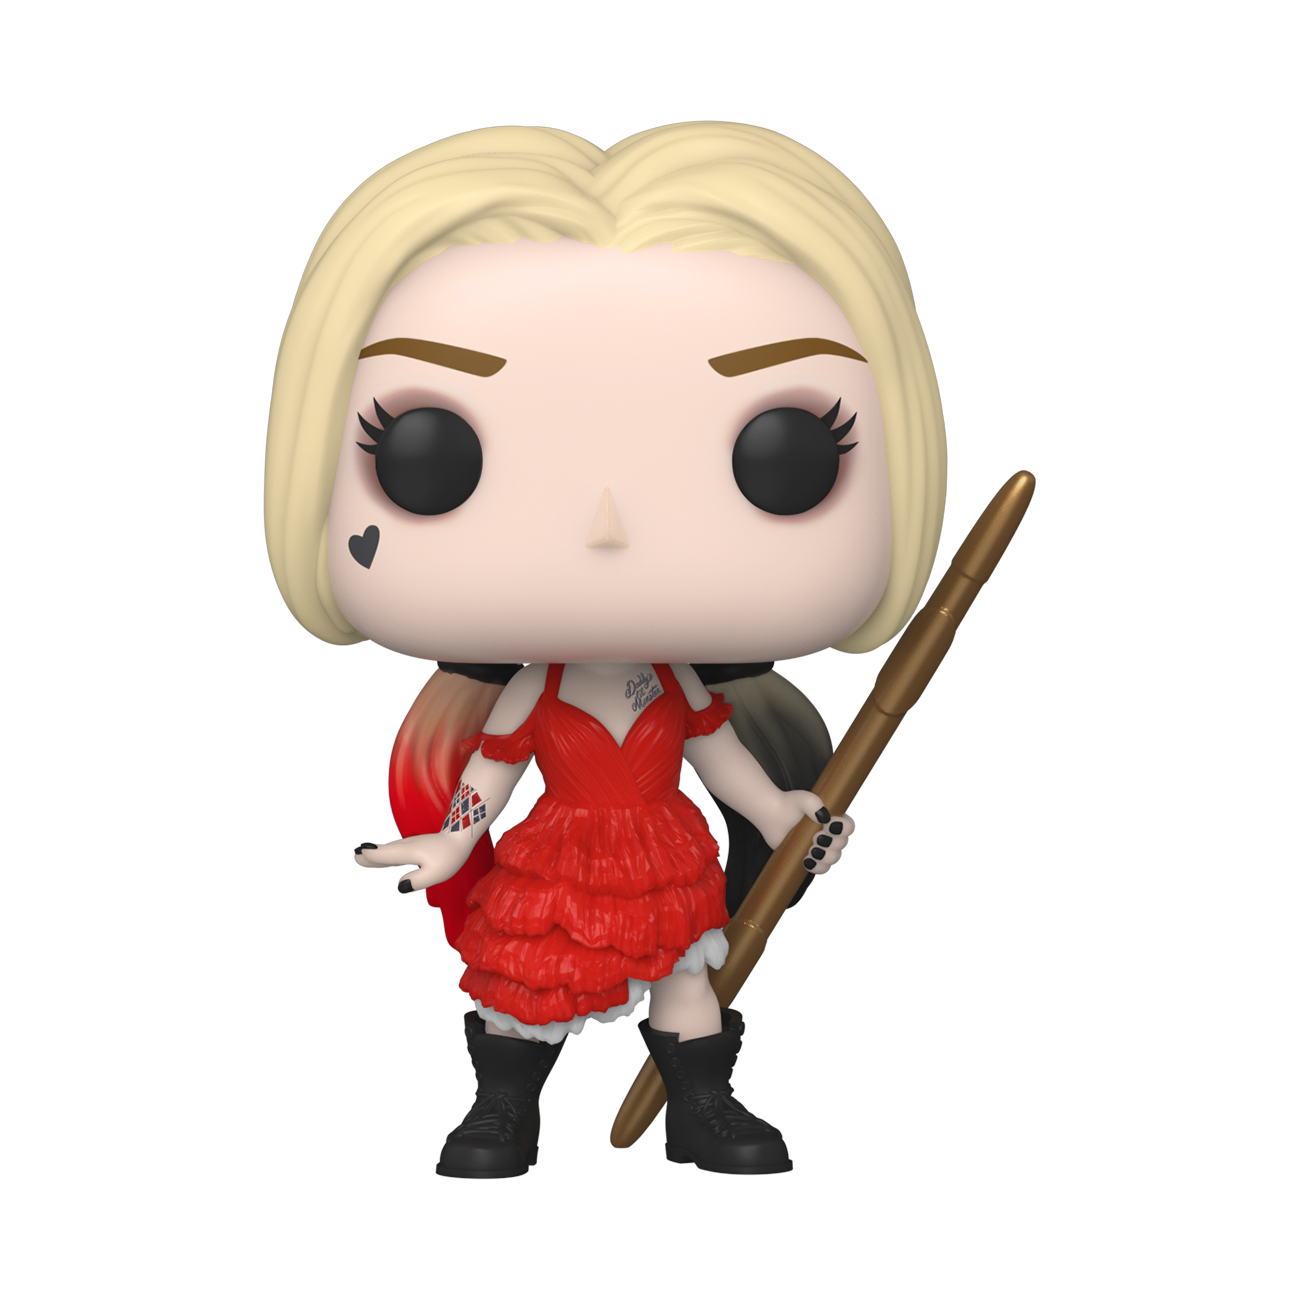 Funko POP! Movies: The Suicide Squad Harley Quinn Damaged Dress figure